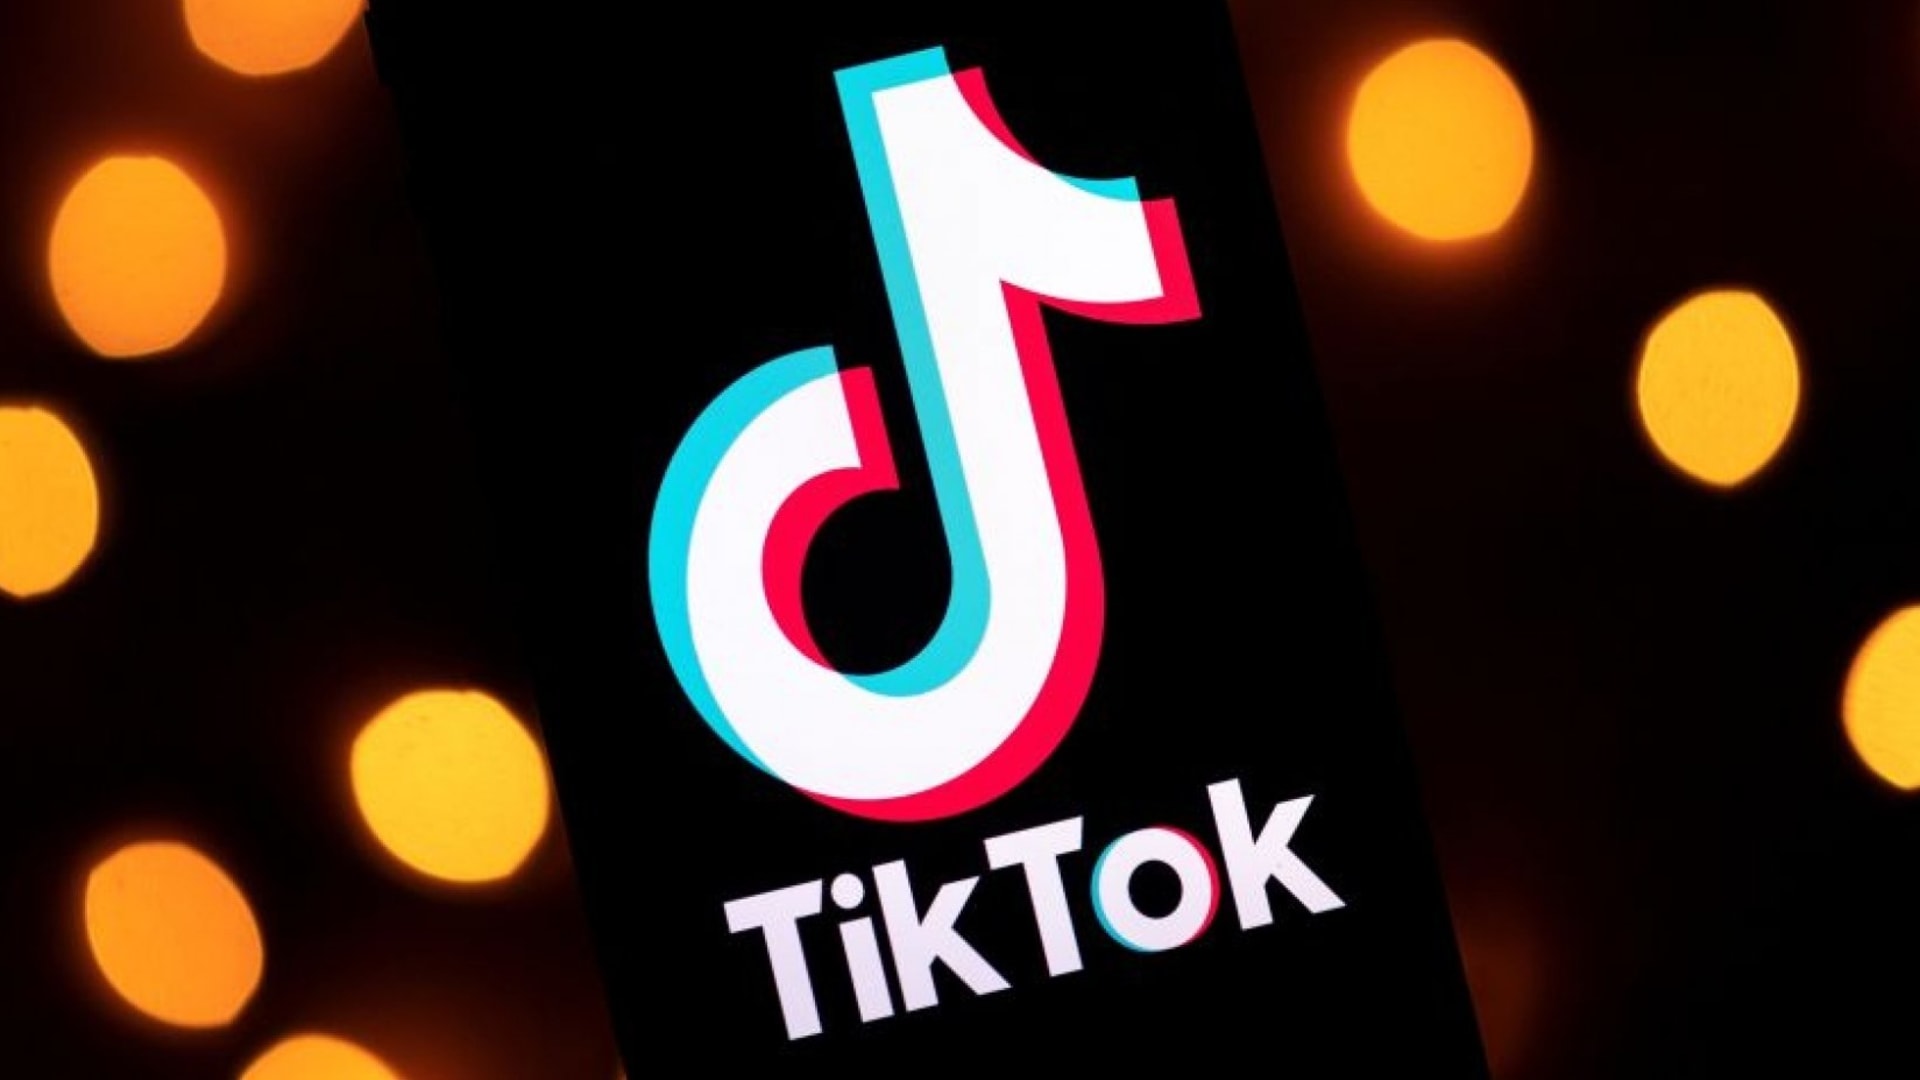 TikTok Just Ended Google's 15-Year Reign as the World's Most Popular Web Domain